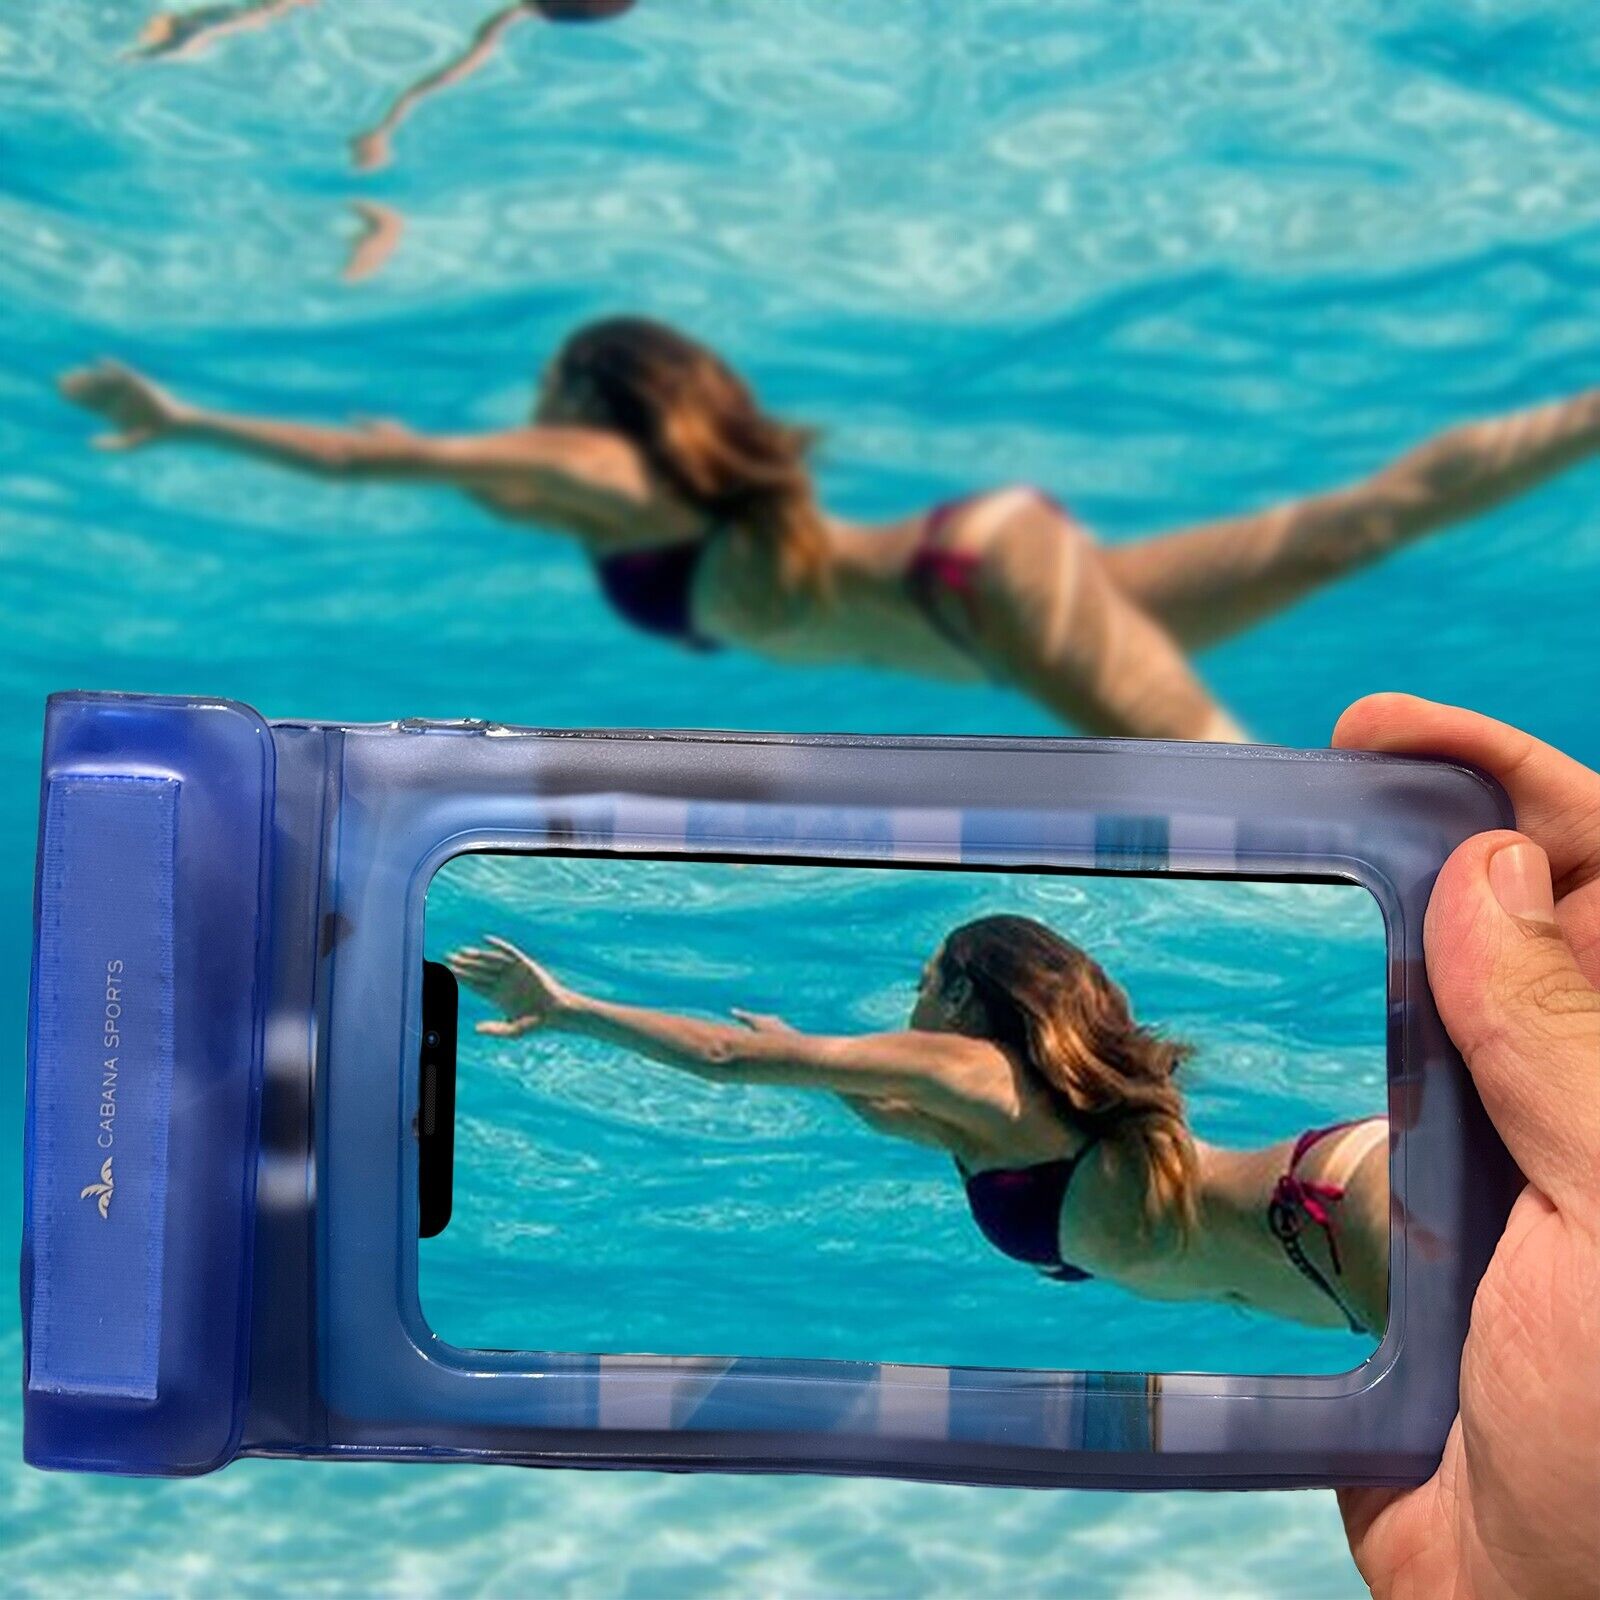 Swimmer recording a video underwater with a phone inside a waterproof pouch